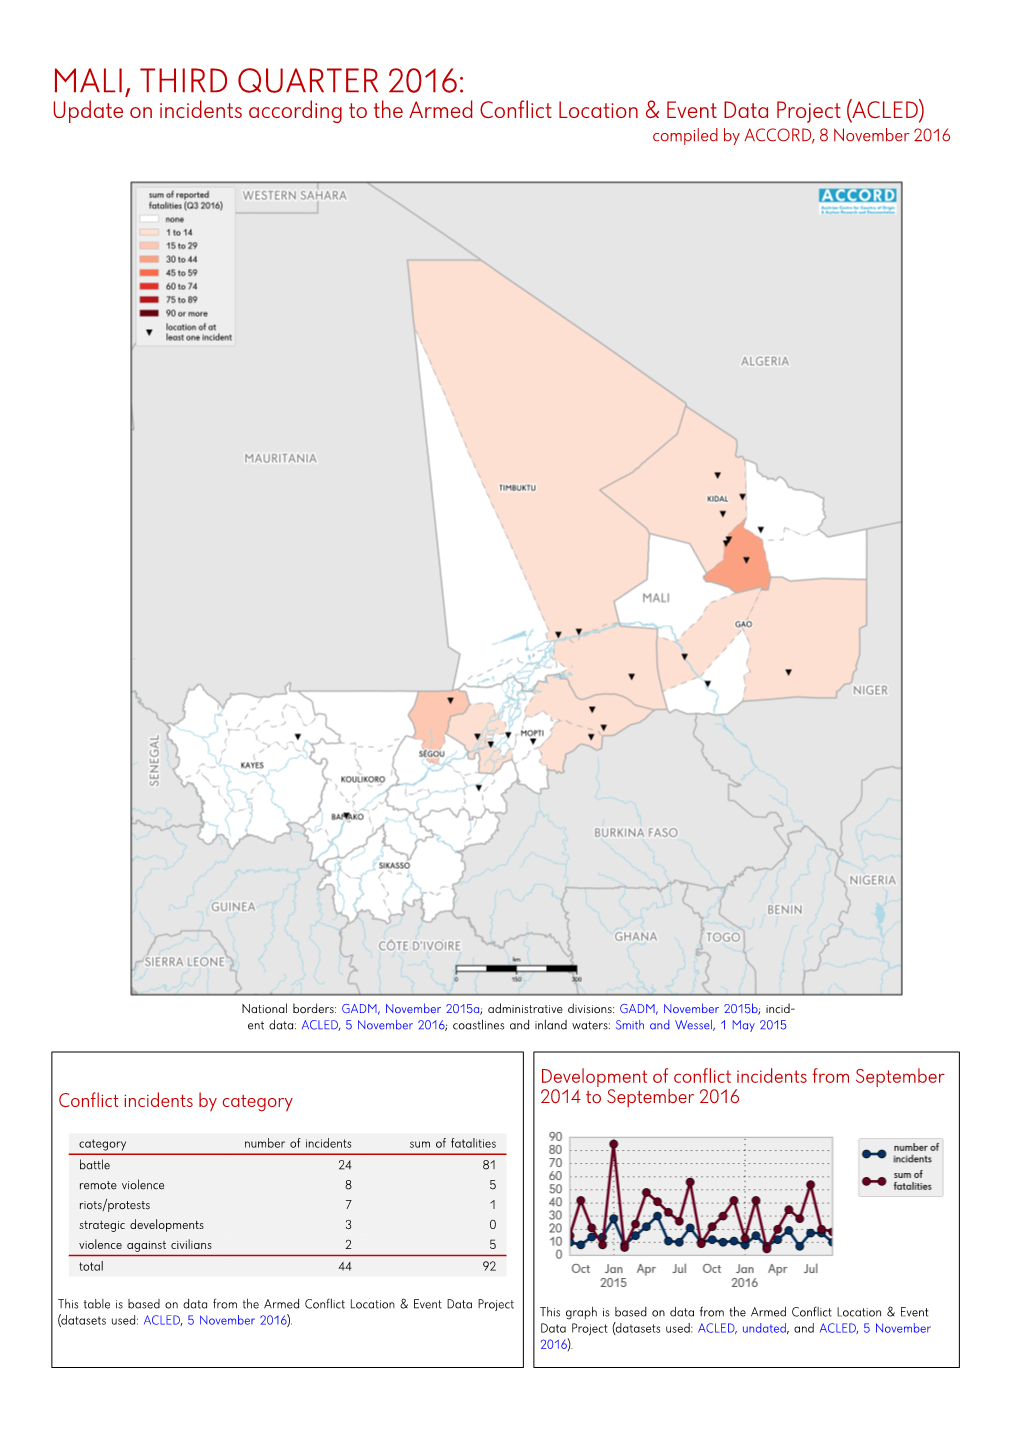 MALI, THIRD QUARTER 2016: Update on Incidents According to the Armed Conflict Location & Event Data Project (ACLED) Compiled by ACCORD, 8 November 2016